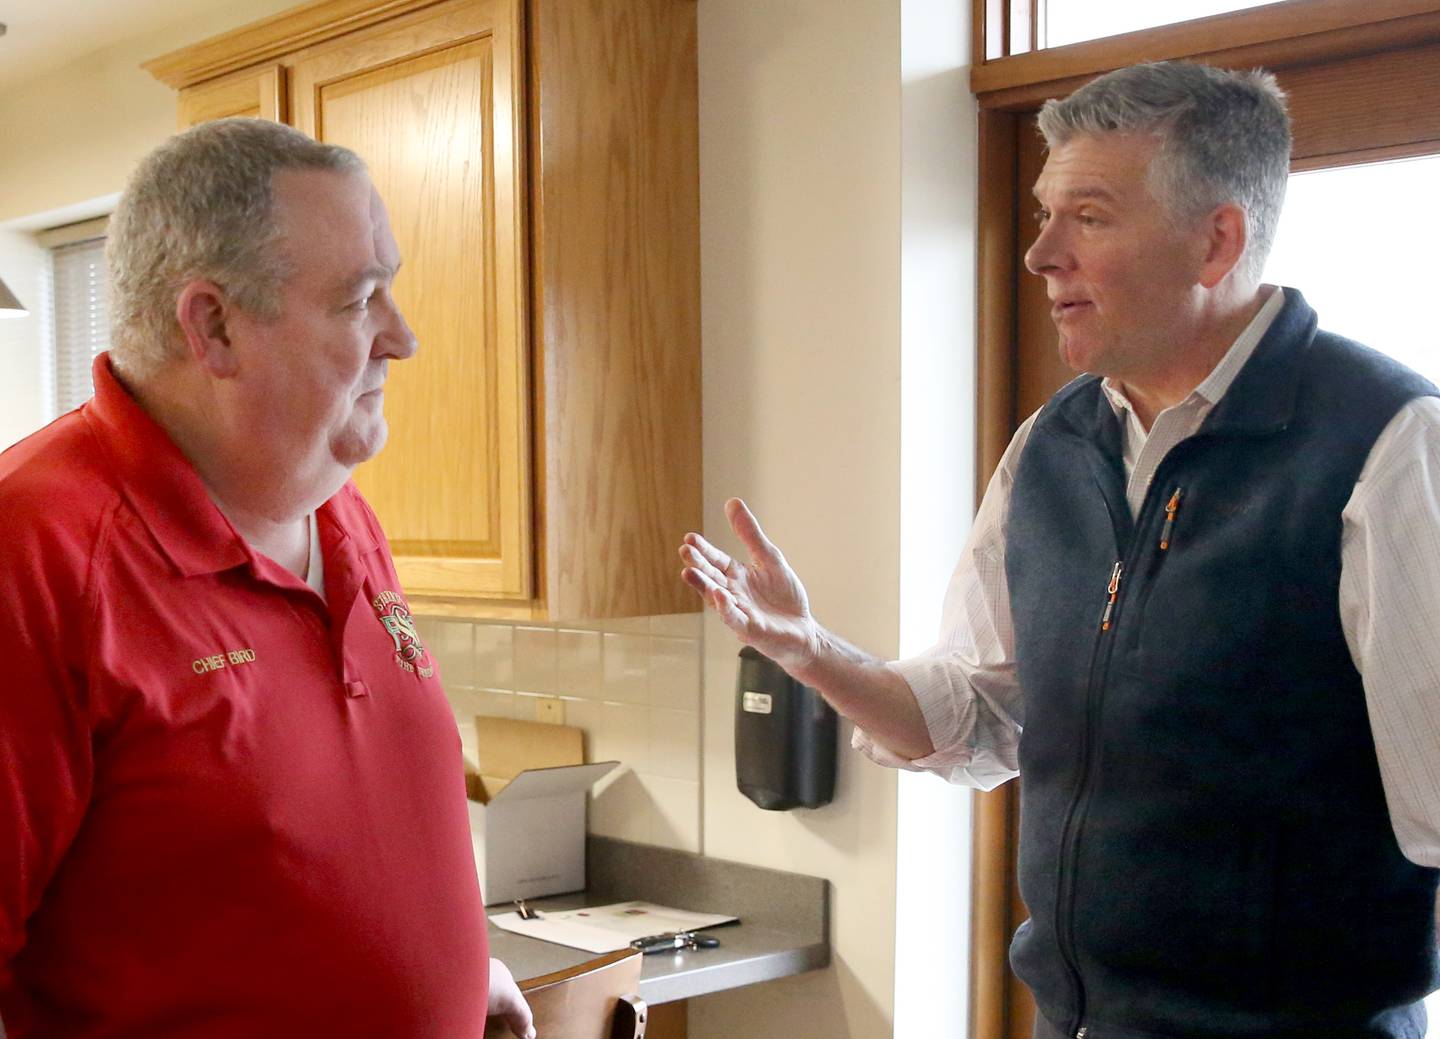 U.S. Rep. Darin LaHood (R-Illinois) meets with Streator Fire Chief Gary Bird as he tours the fire department on Tuesday, Feb. 14, 2023 in Streator.